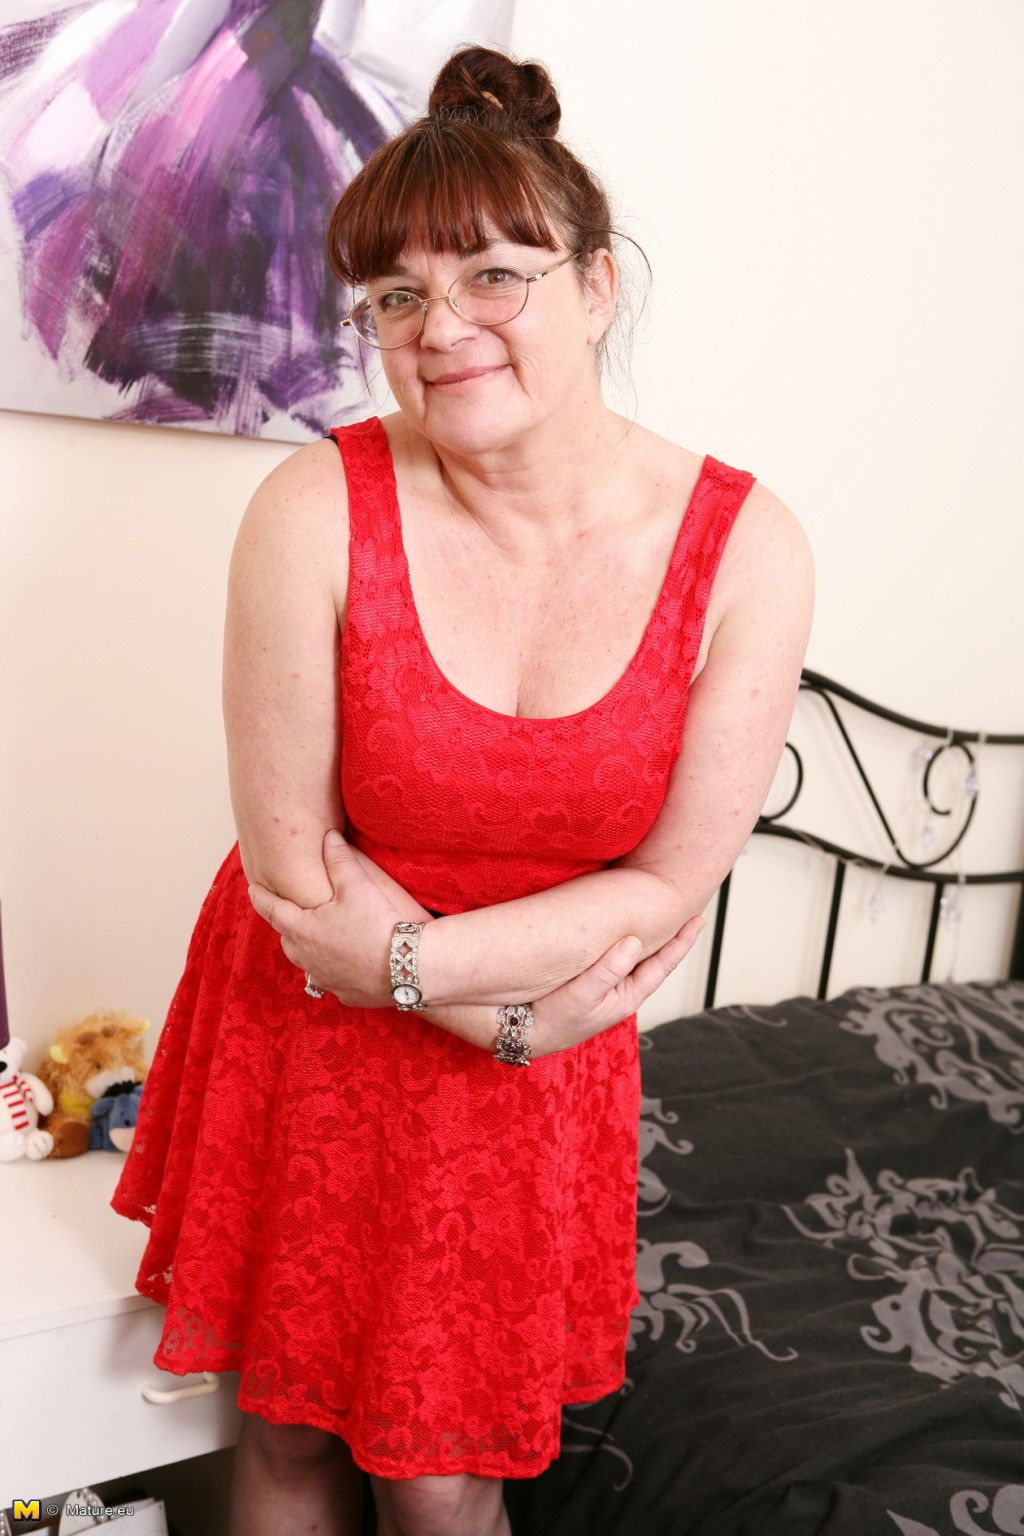 Horny british mature woman diane loves to get wet and wild